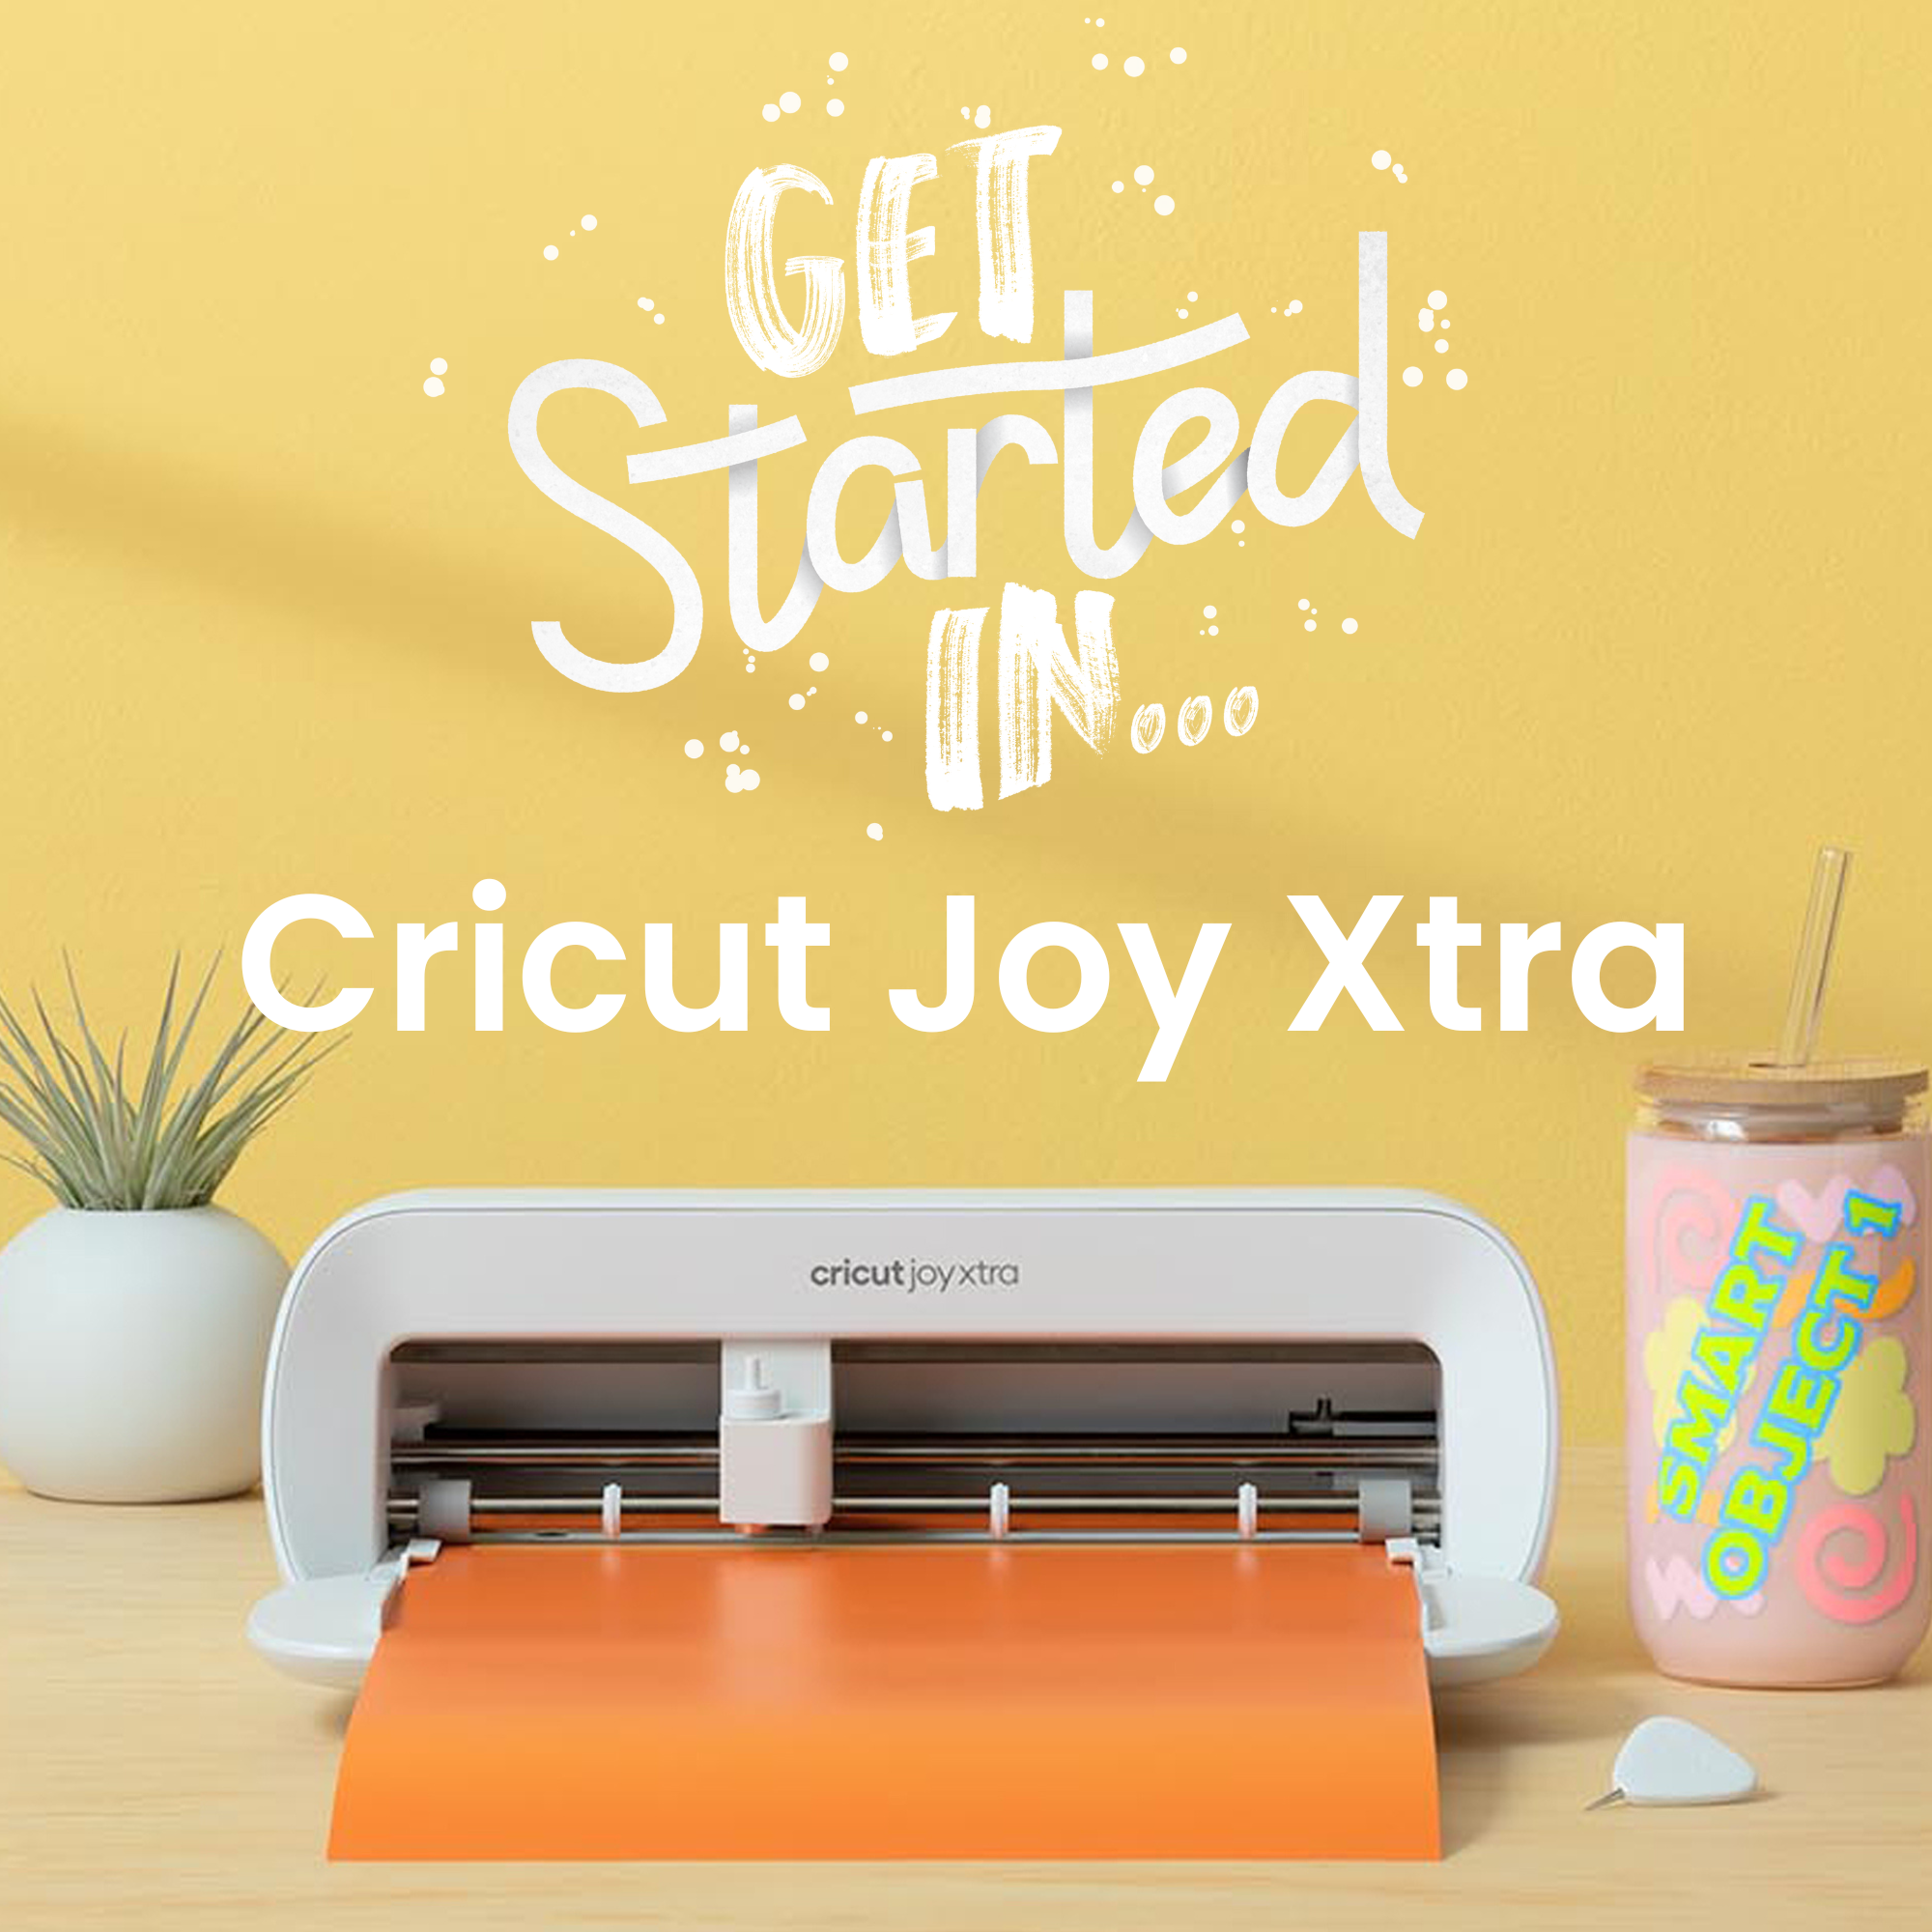  Cricut Joy Machine & Digital Content Library Bundle - Includes  30 images in Design Space App - Portable DIY Smart Machine for creating  customized cards, crafts, & labels Blue